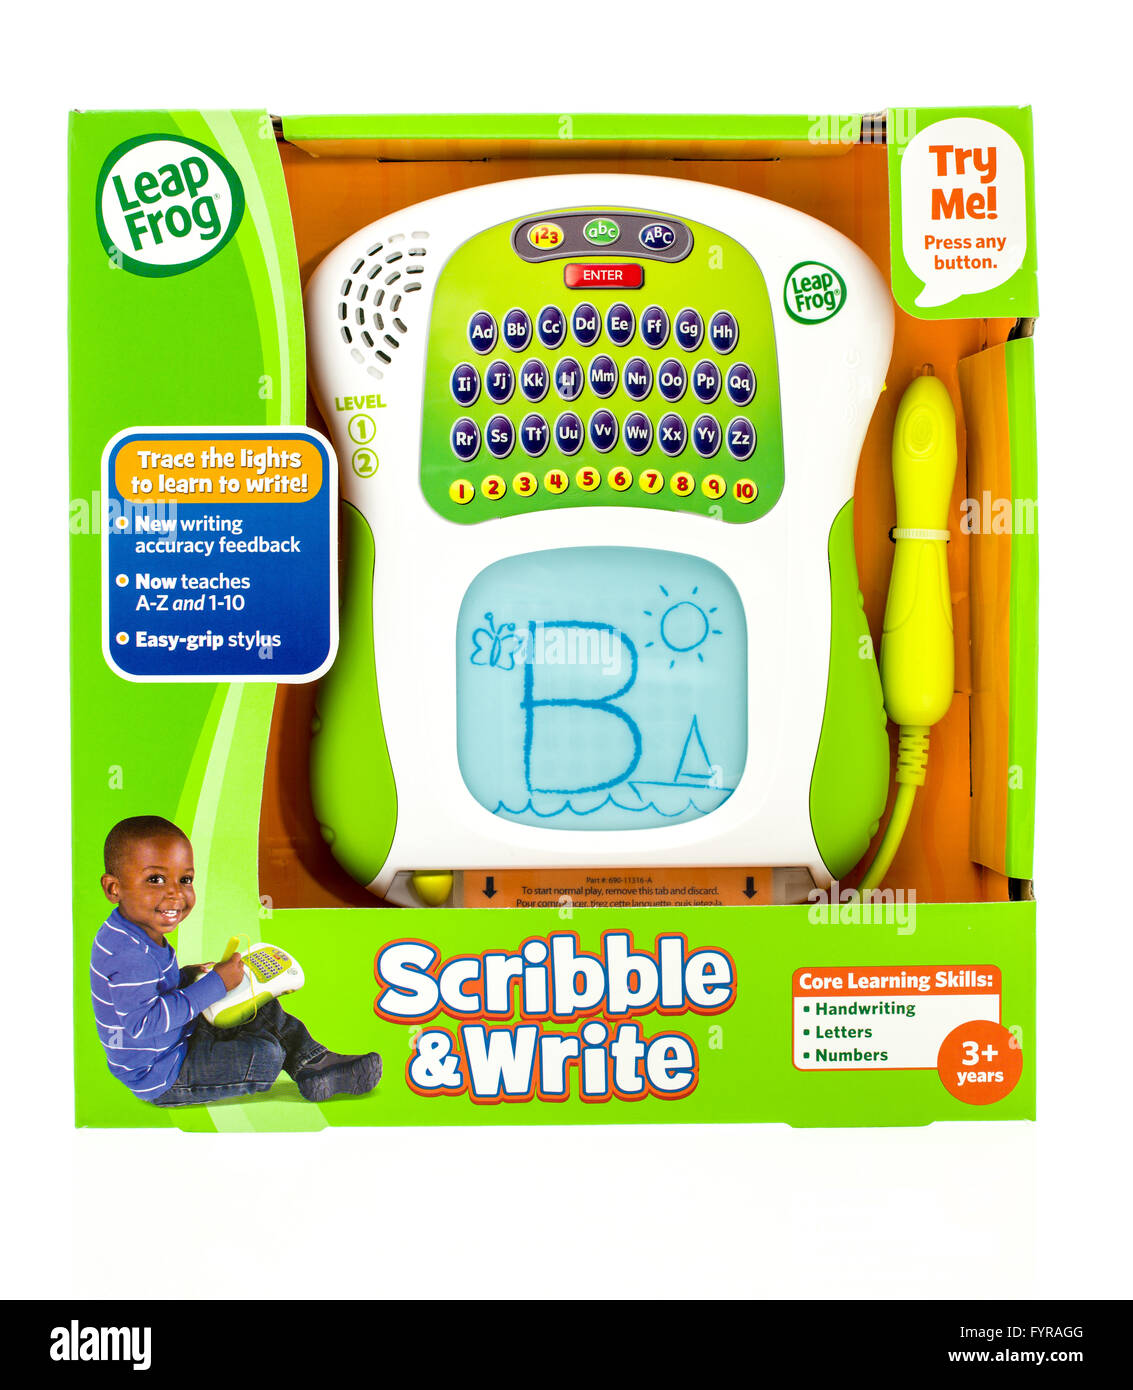 Winneconne, WI - 22 Dec 2015:  Package of a learning tool for kids to learn how to write by tracing the letter or number made by Stock Photo